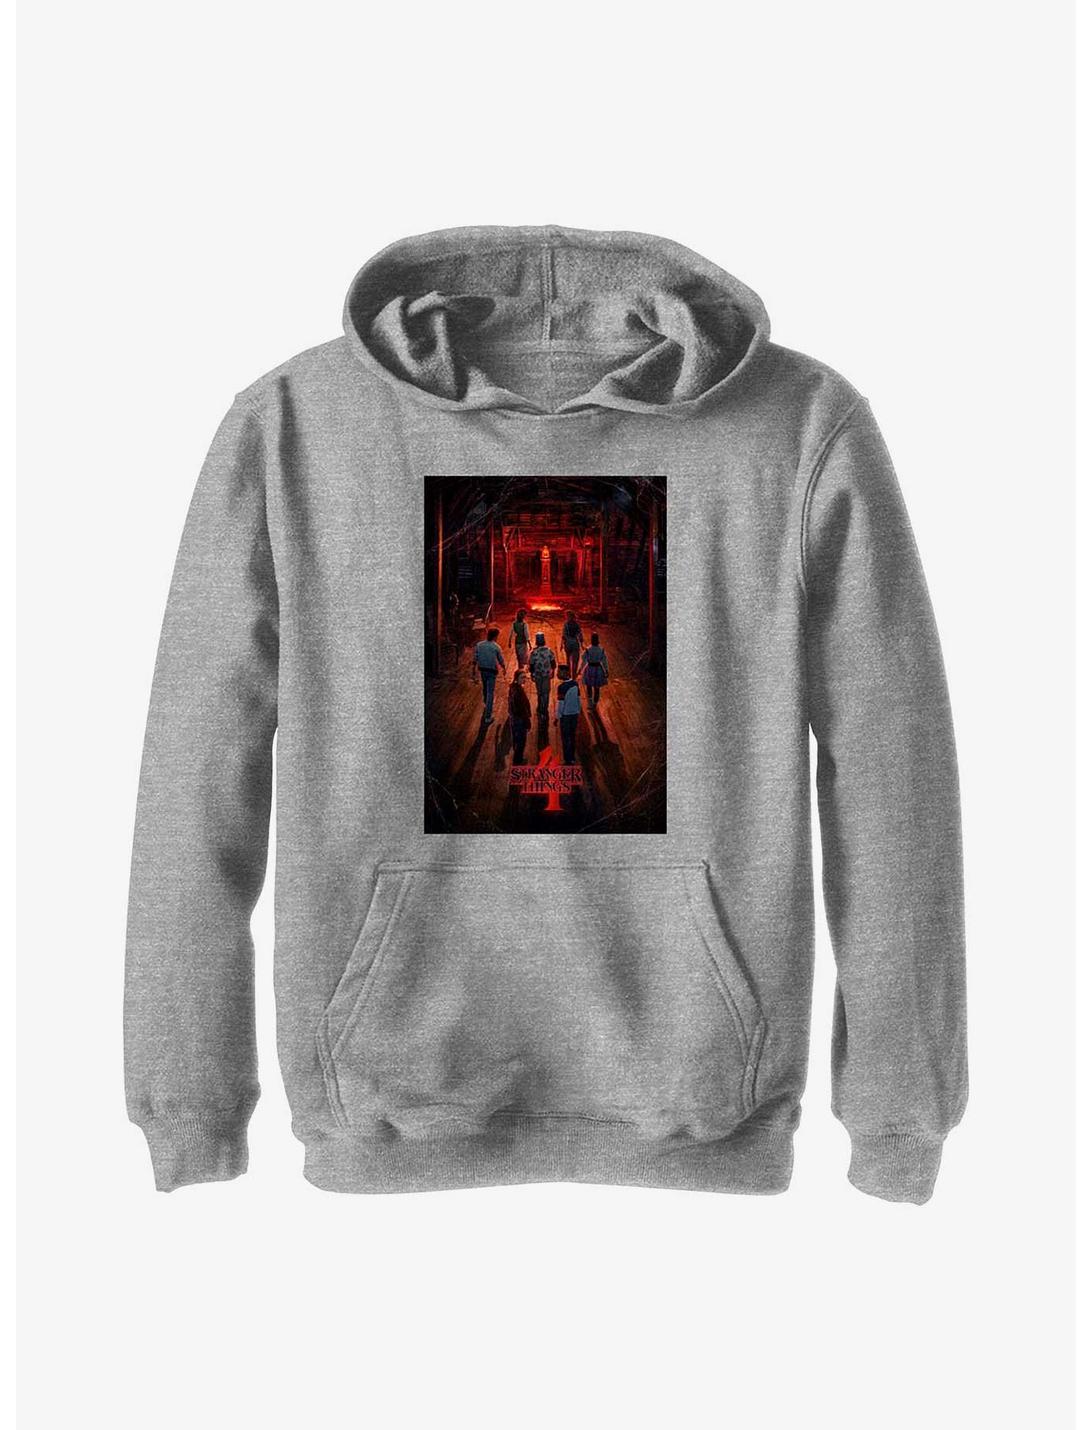 Stranger Things Creel Poster Youth Hoodie, ATH HTR, hi-res